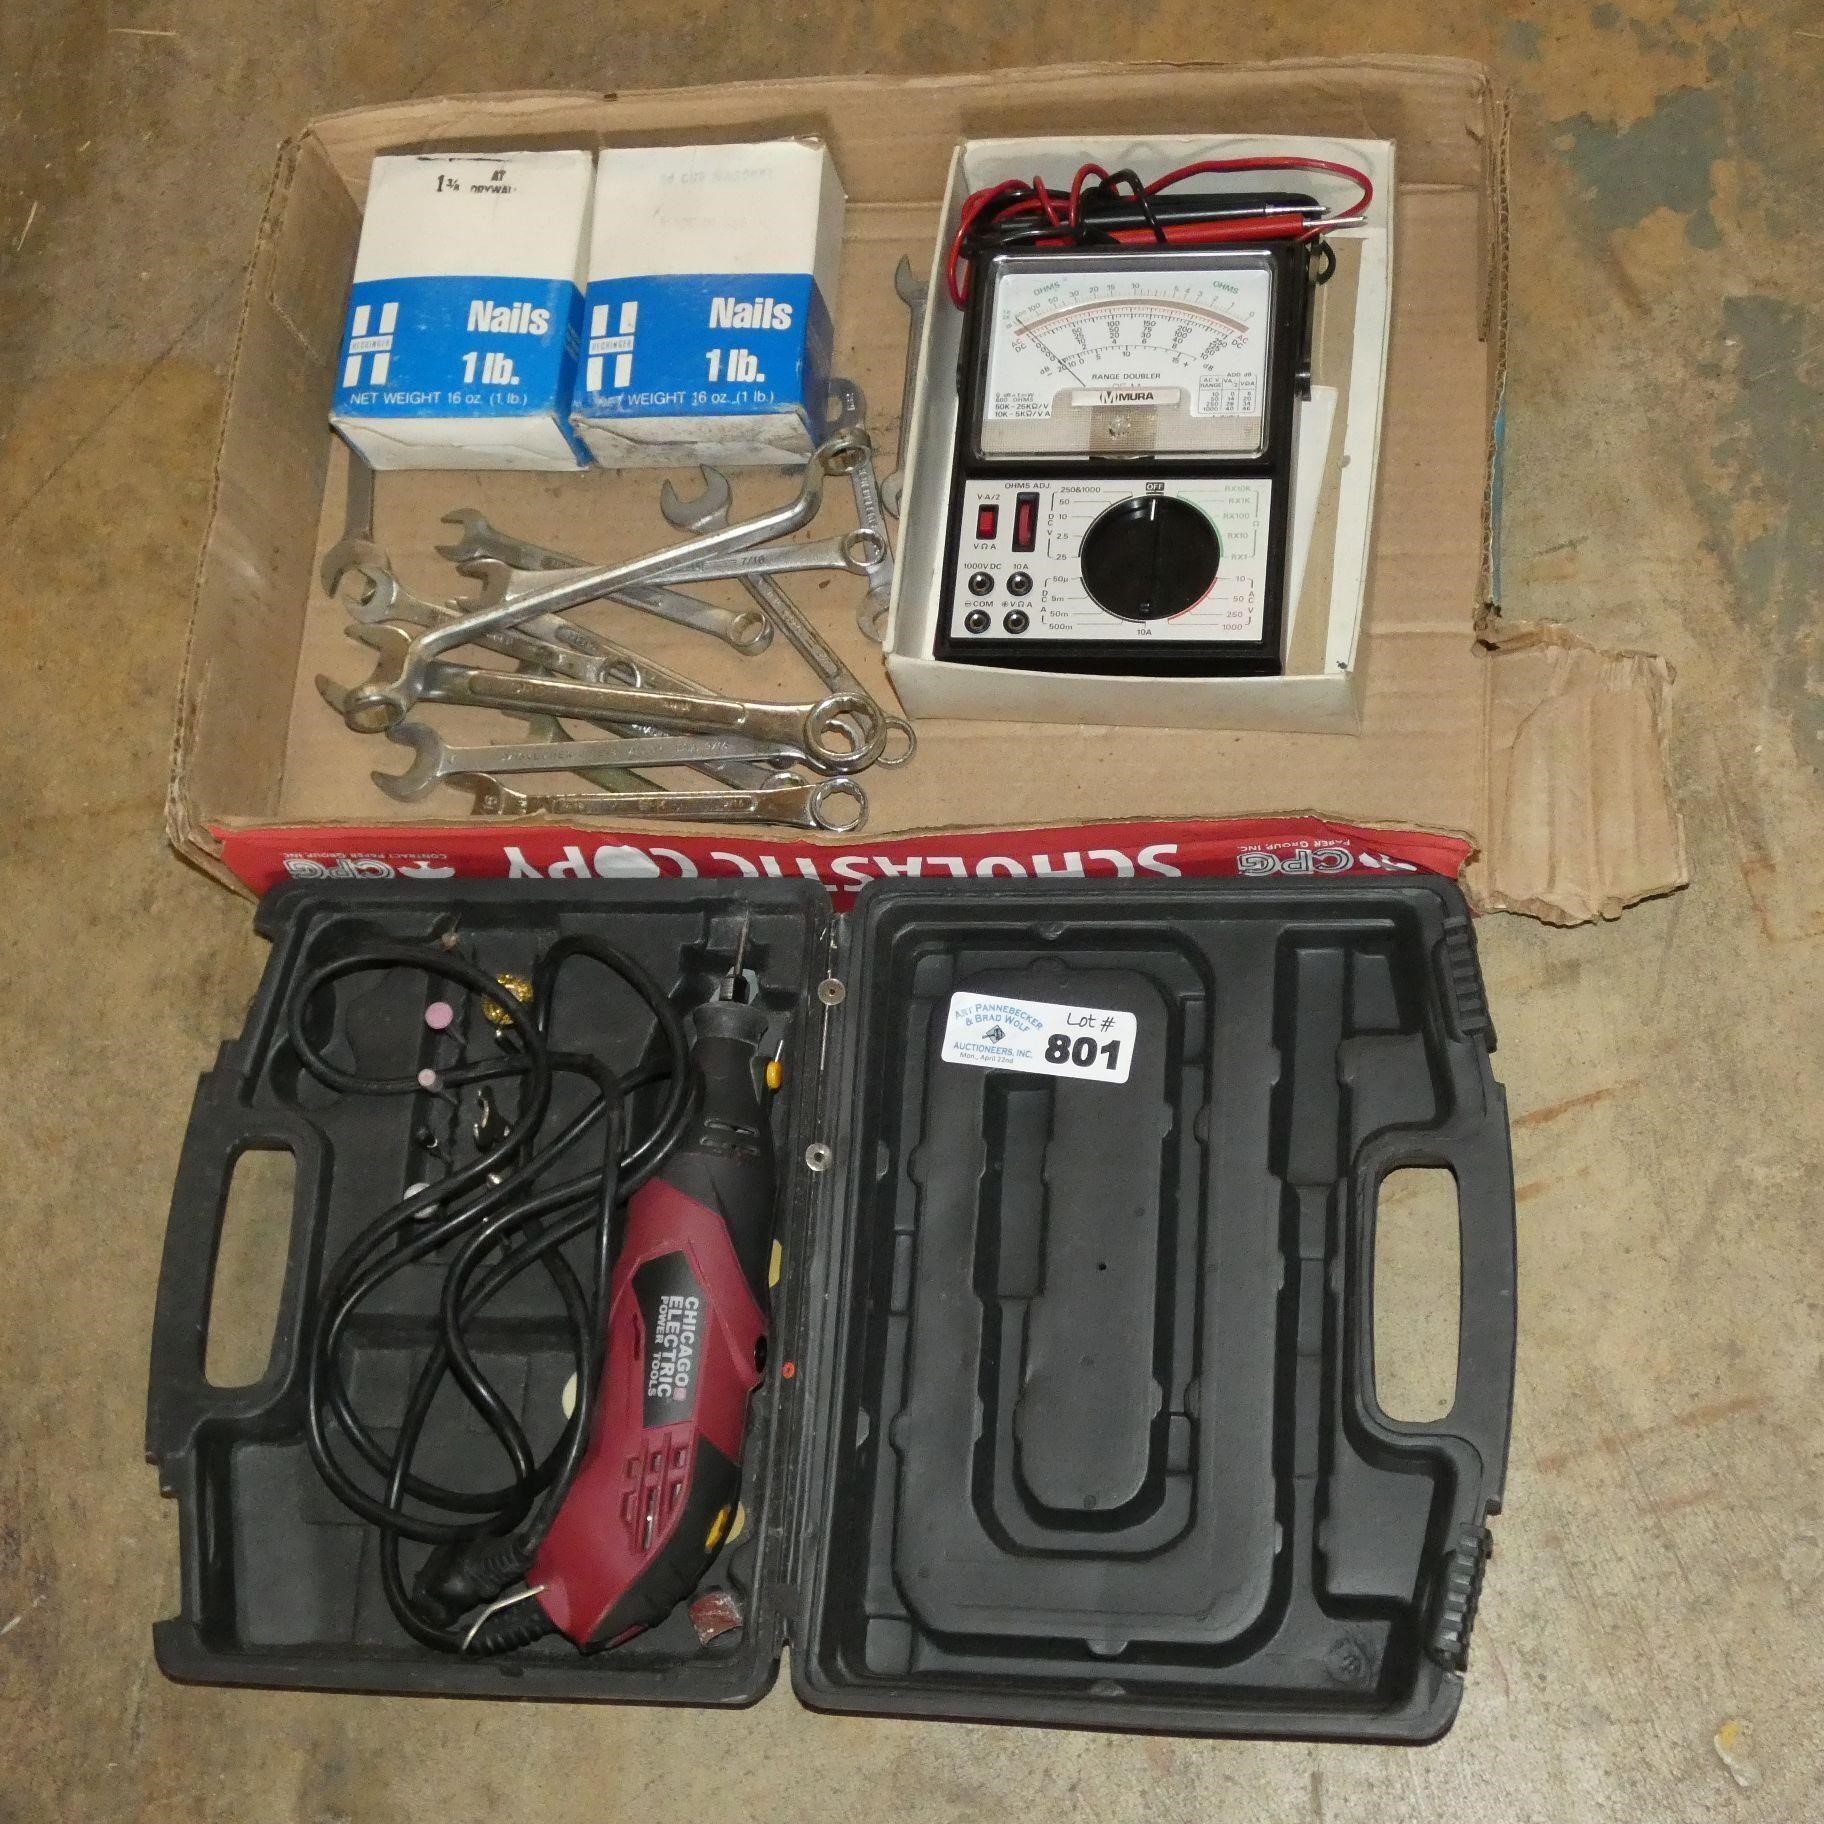 Assorted Wrenches, Chicago Power Tool, Nails